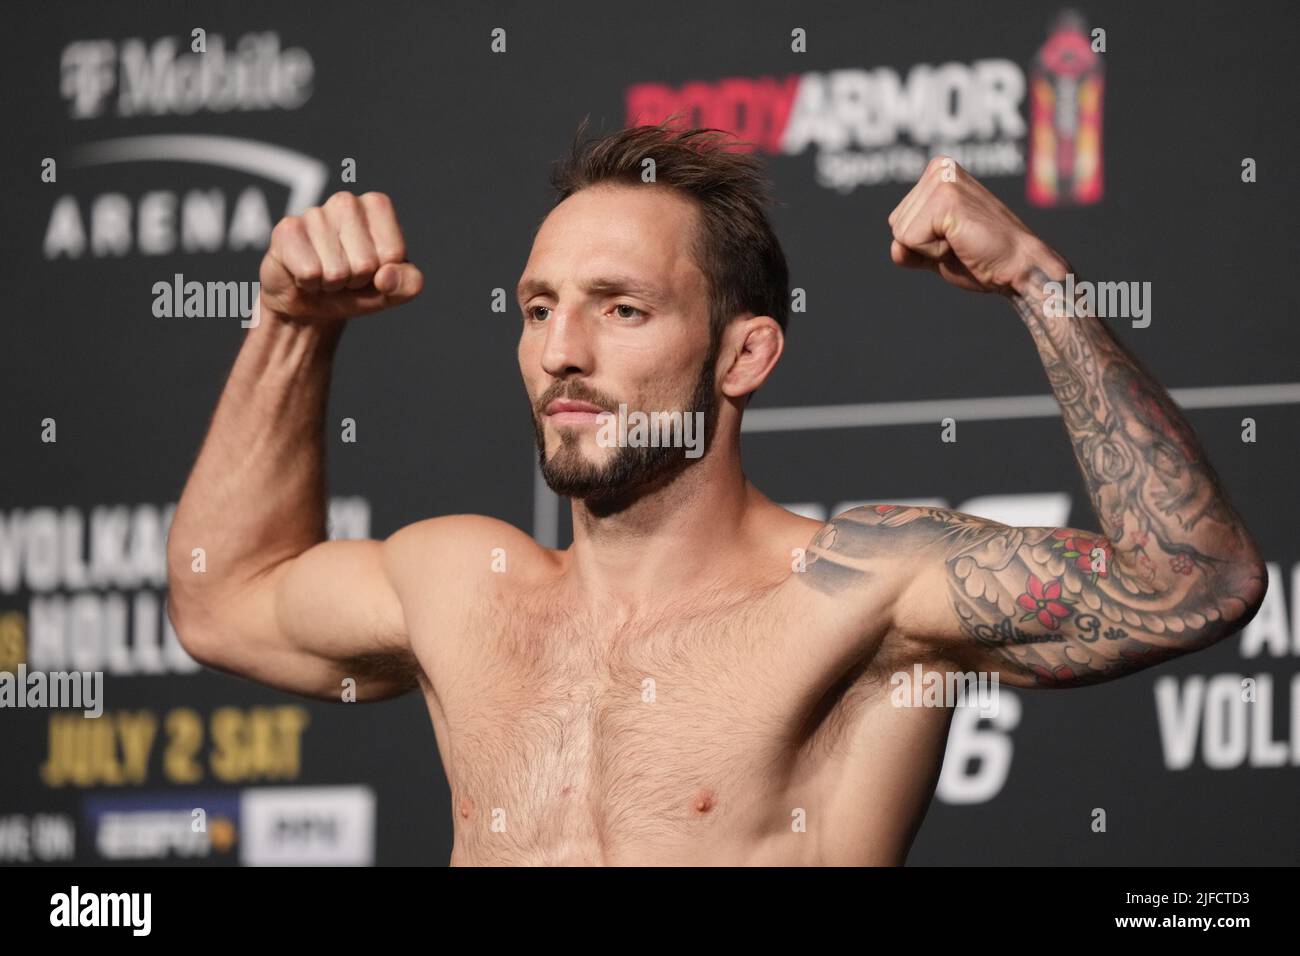 July 1, 2022, LAS VEGAS, NV, LAS VEGAS, NV, United States: LAS VEGAS, NV - June 1: Brad Riddell steps on the scale for the official weigh-ins at T-Mobile Arena for UFC 276 on July 1, 2022 in LAS VEGAS, NV, United States. (Credit Image: © Louis Grasse/PX Imagens via ZUMA Press Wire) Stock Photo